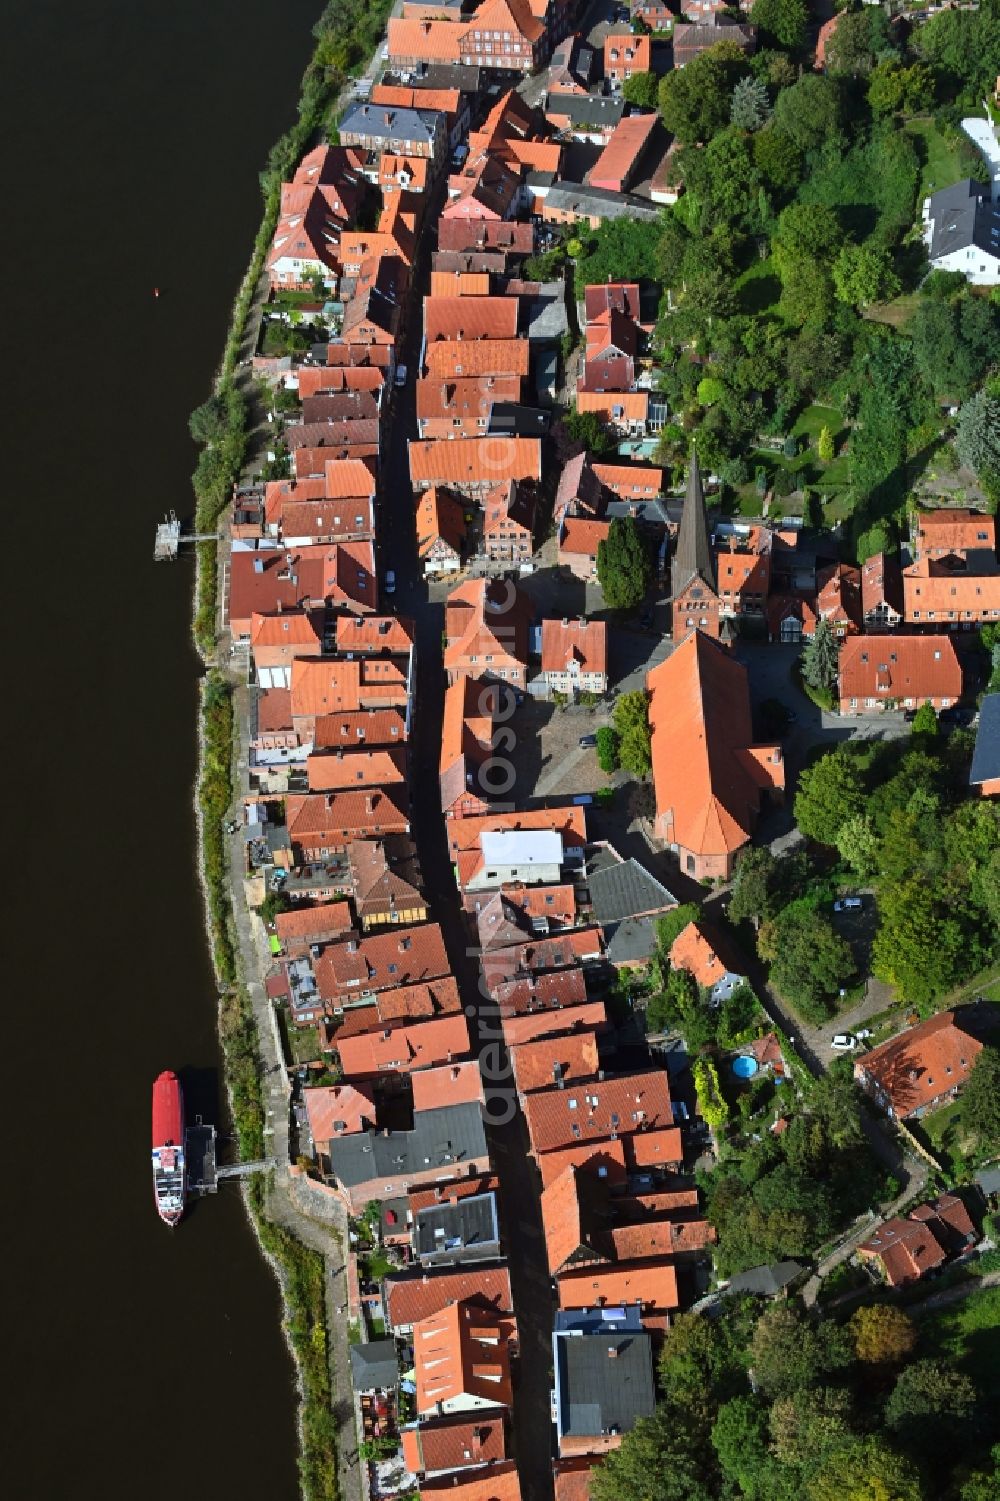 Lauenburg/Elbe from above - Town on the banks of the river of the River Elbe in Lauenburg/Elbe in the state Schleswig-Holstein, Germany